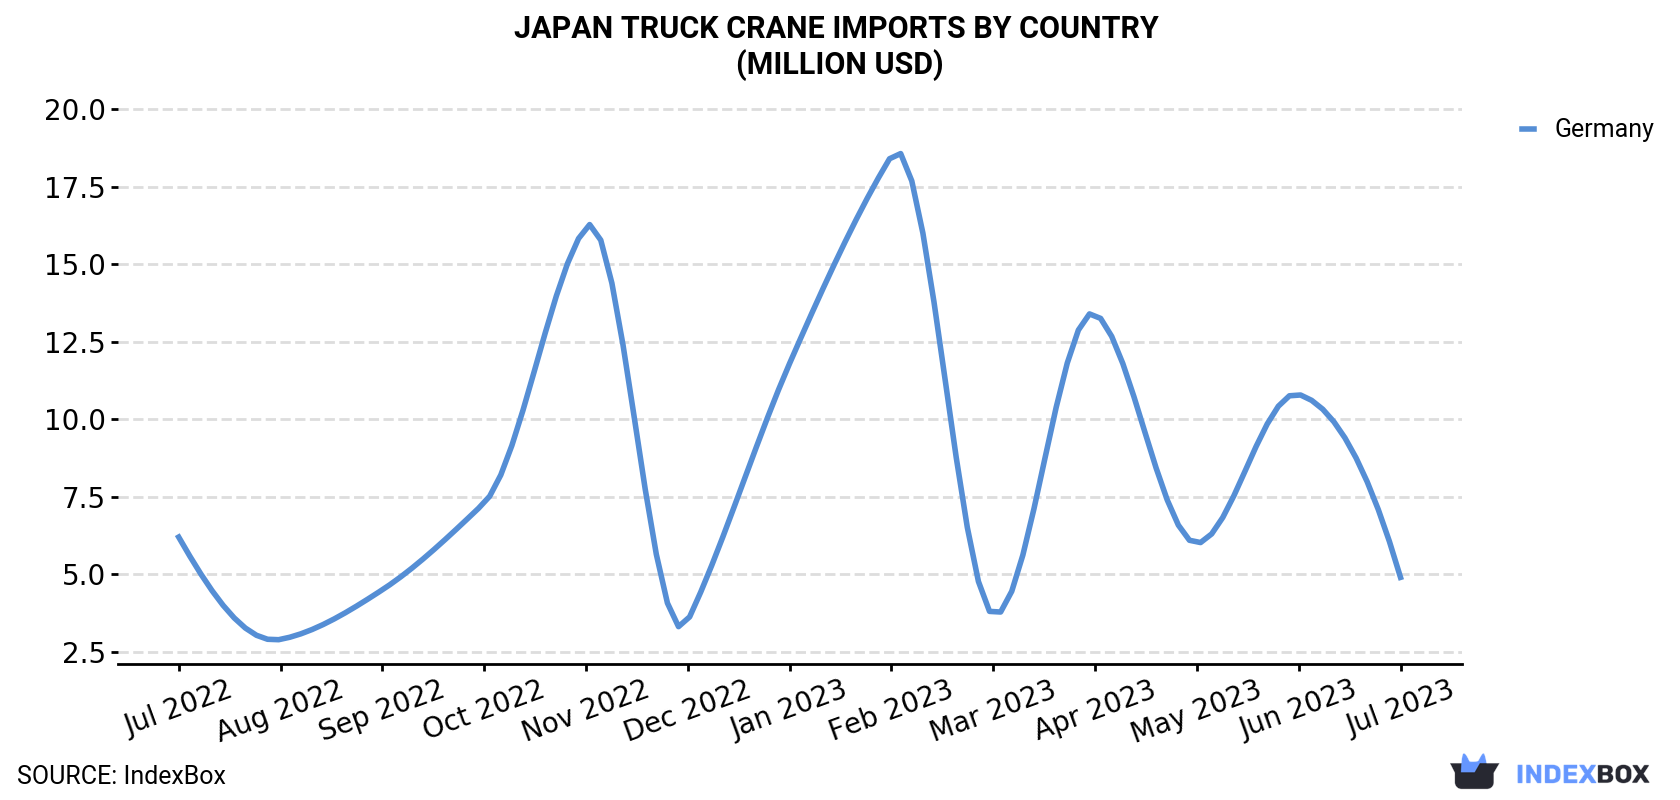 Japan Truck Crane Imports By Country (Million USD)